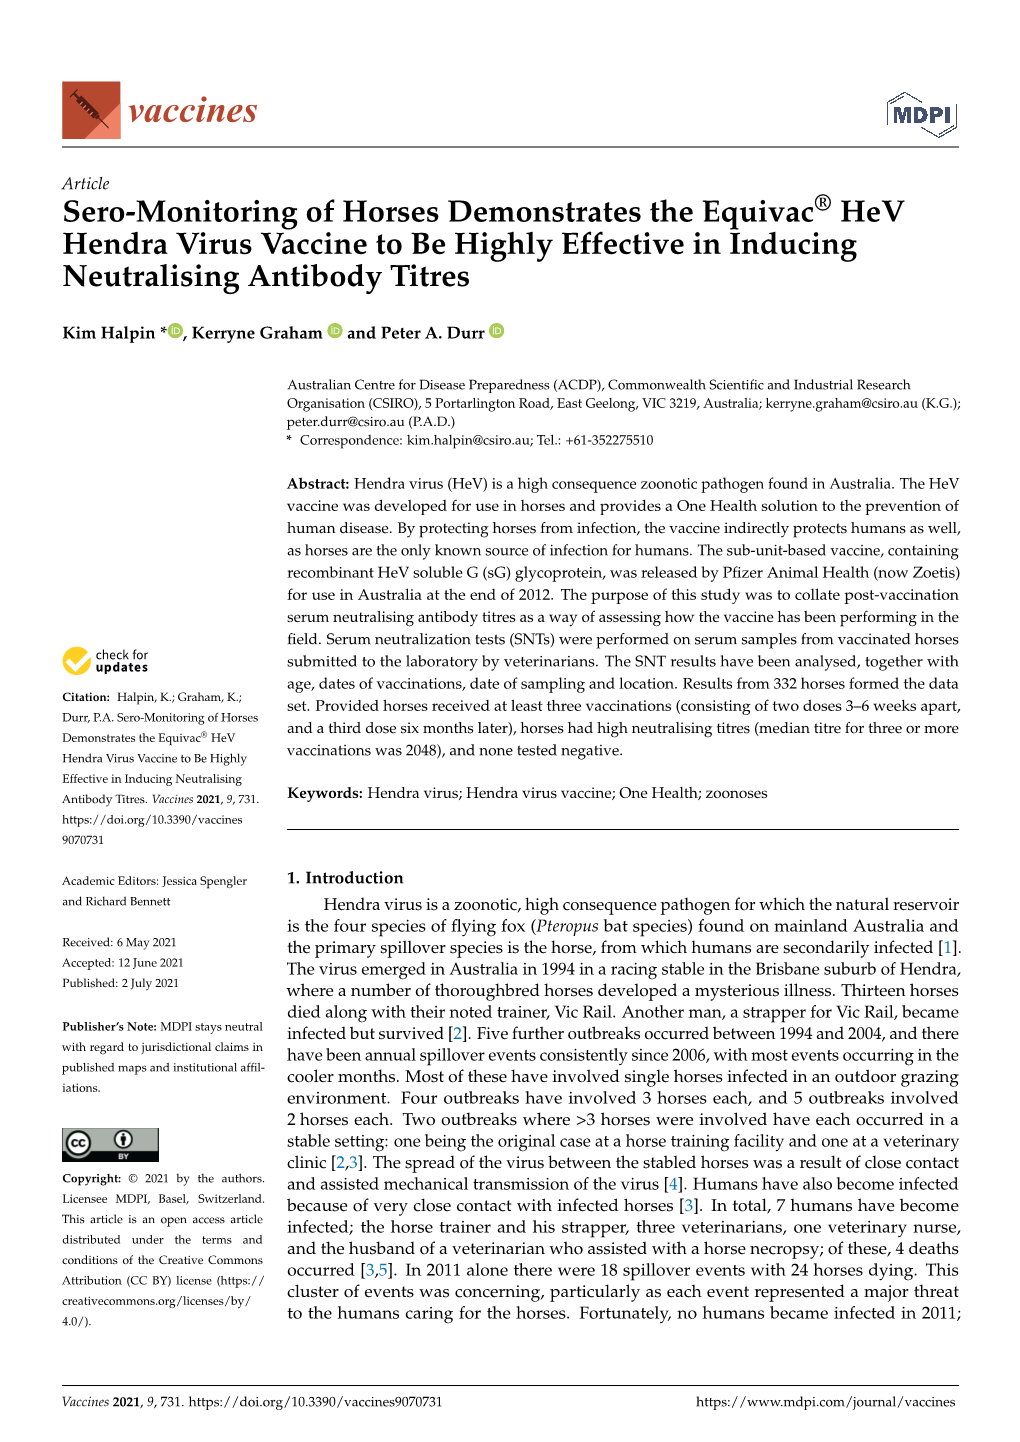 Sero-Monitoring of Horses Demonstrates the Equivac® Hev Hendra Virus Vaccine to Be Highly Effective in Inducing Neu-Tralising A